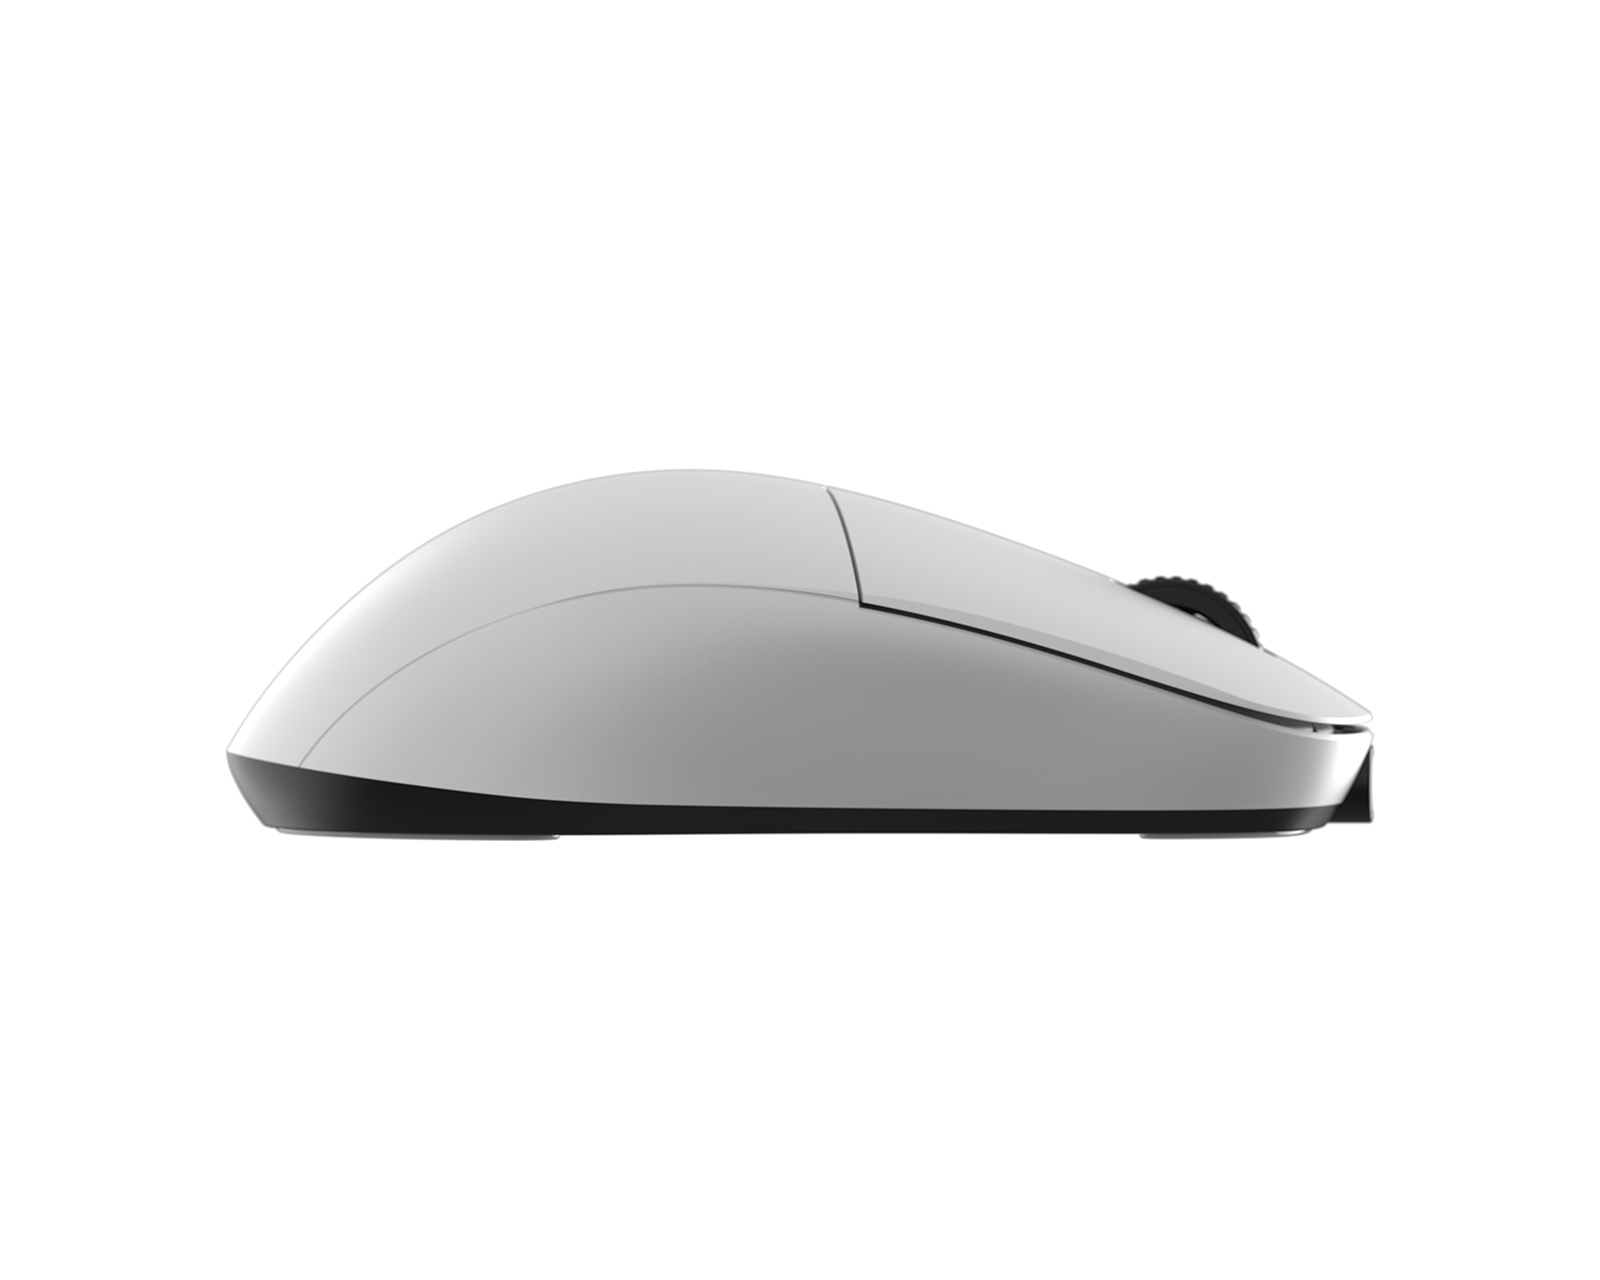 Endgame Gear XM2w Wireless Gaming Mouse - White - us.MaxGaming.com